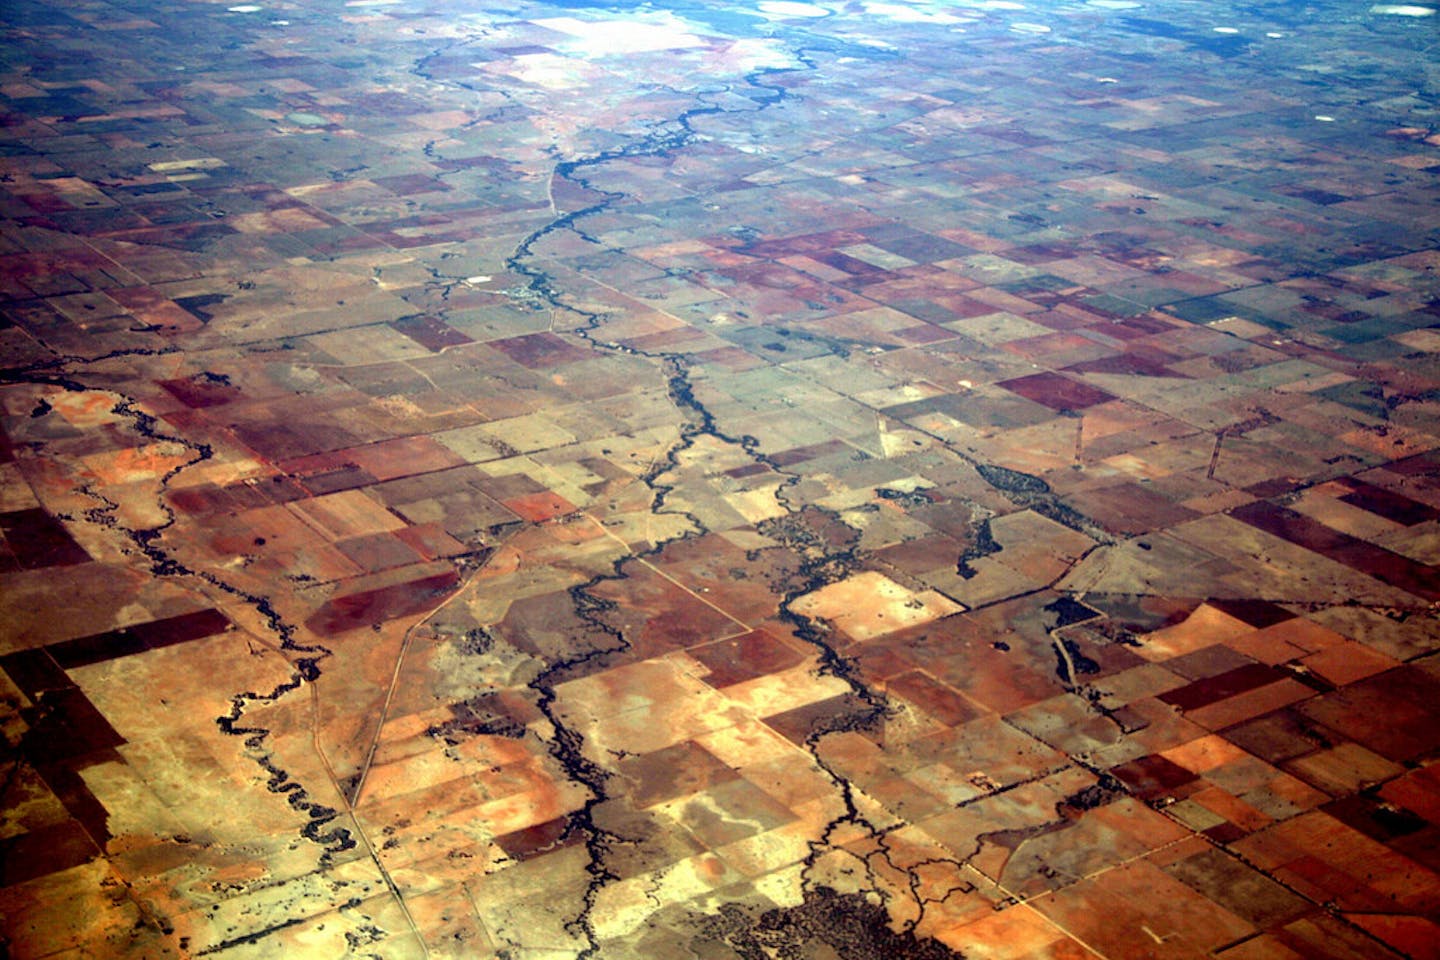 Australian drylands viewed from the air.